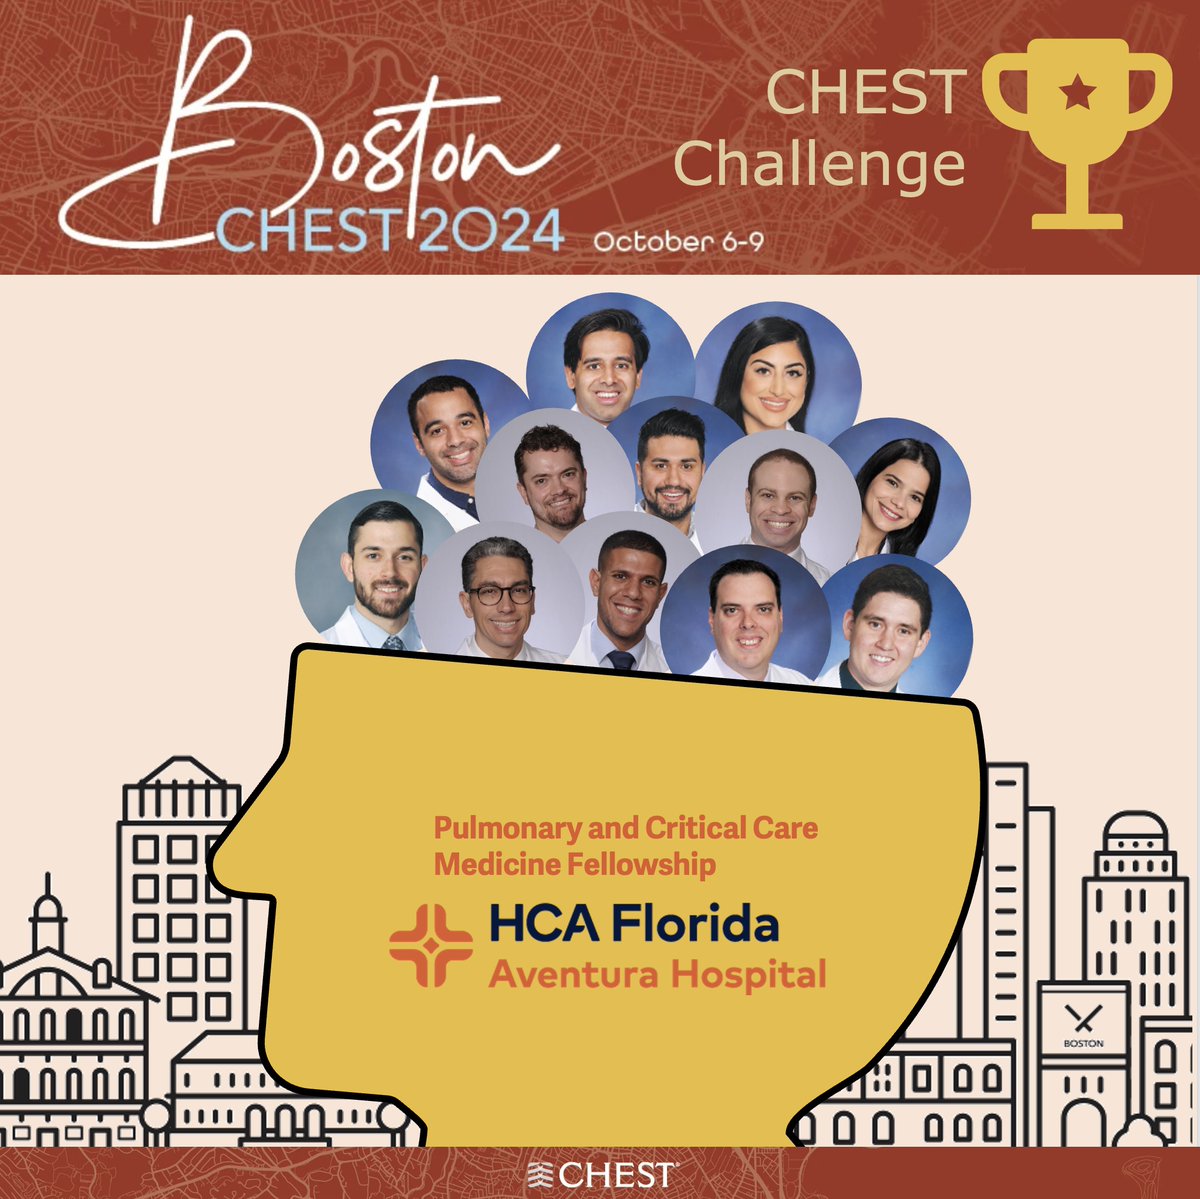 The online quiz for # CHESTChallenge2024 is open until the end of the month! My #fellows will take the quiz and compete for a place in @accpchest history! We 'chest' 😊challenge -->